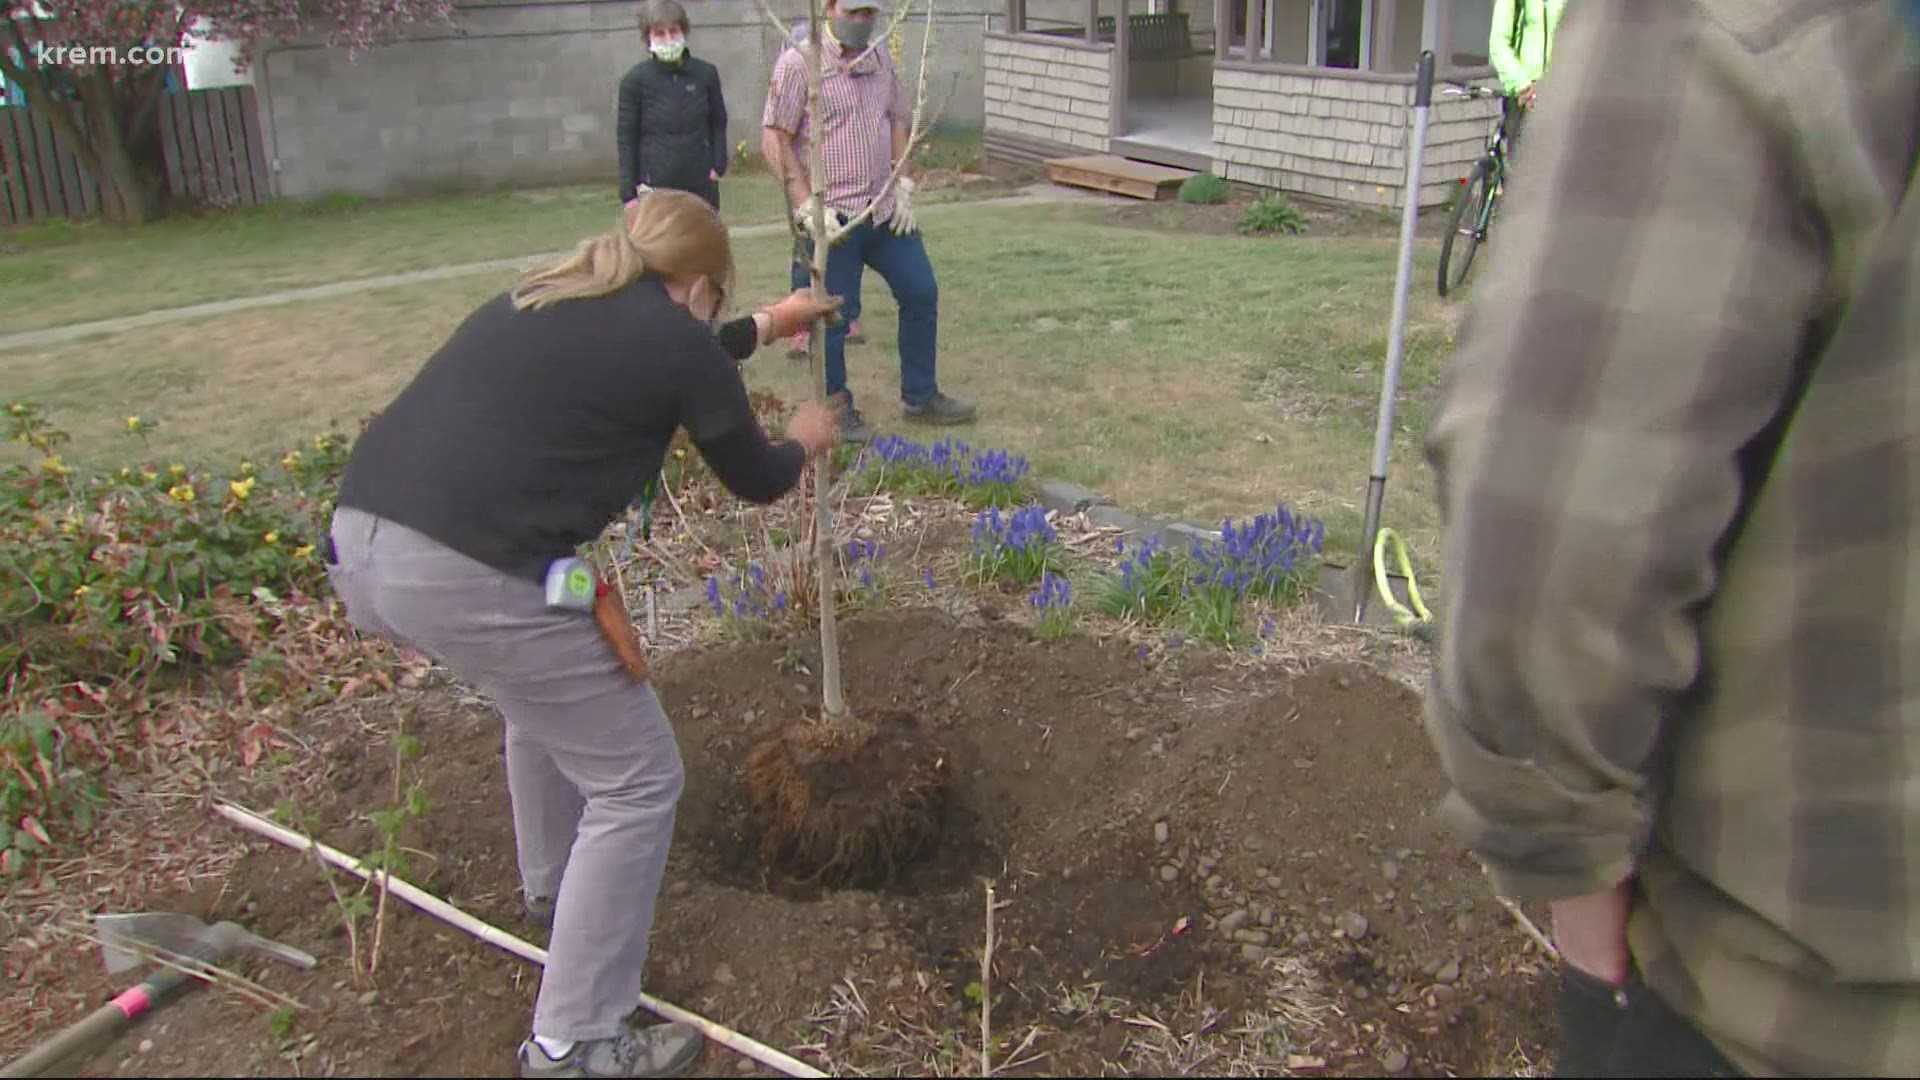 The Lands Council and other volunteers planted 25 trees to increase canopy coverage.